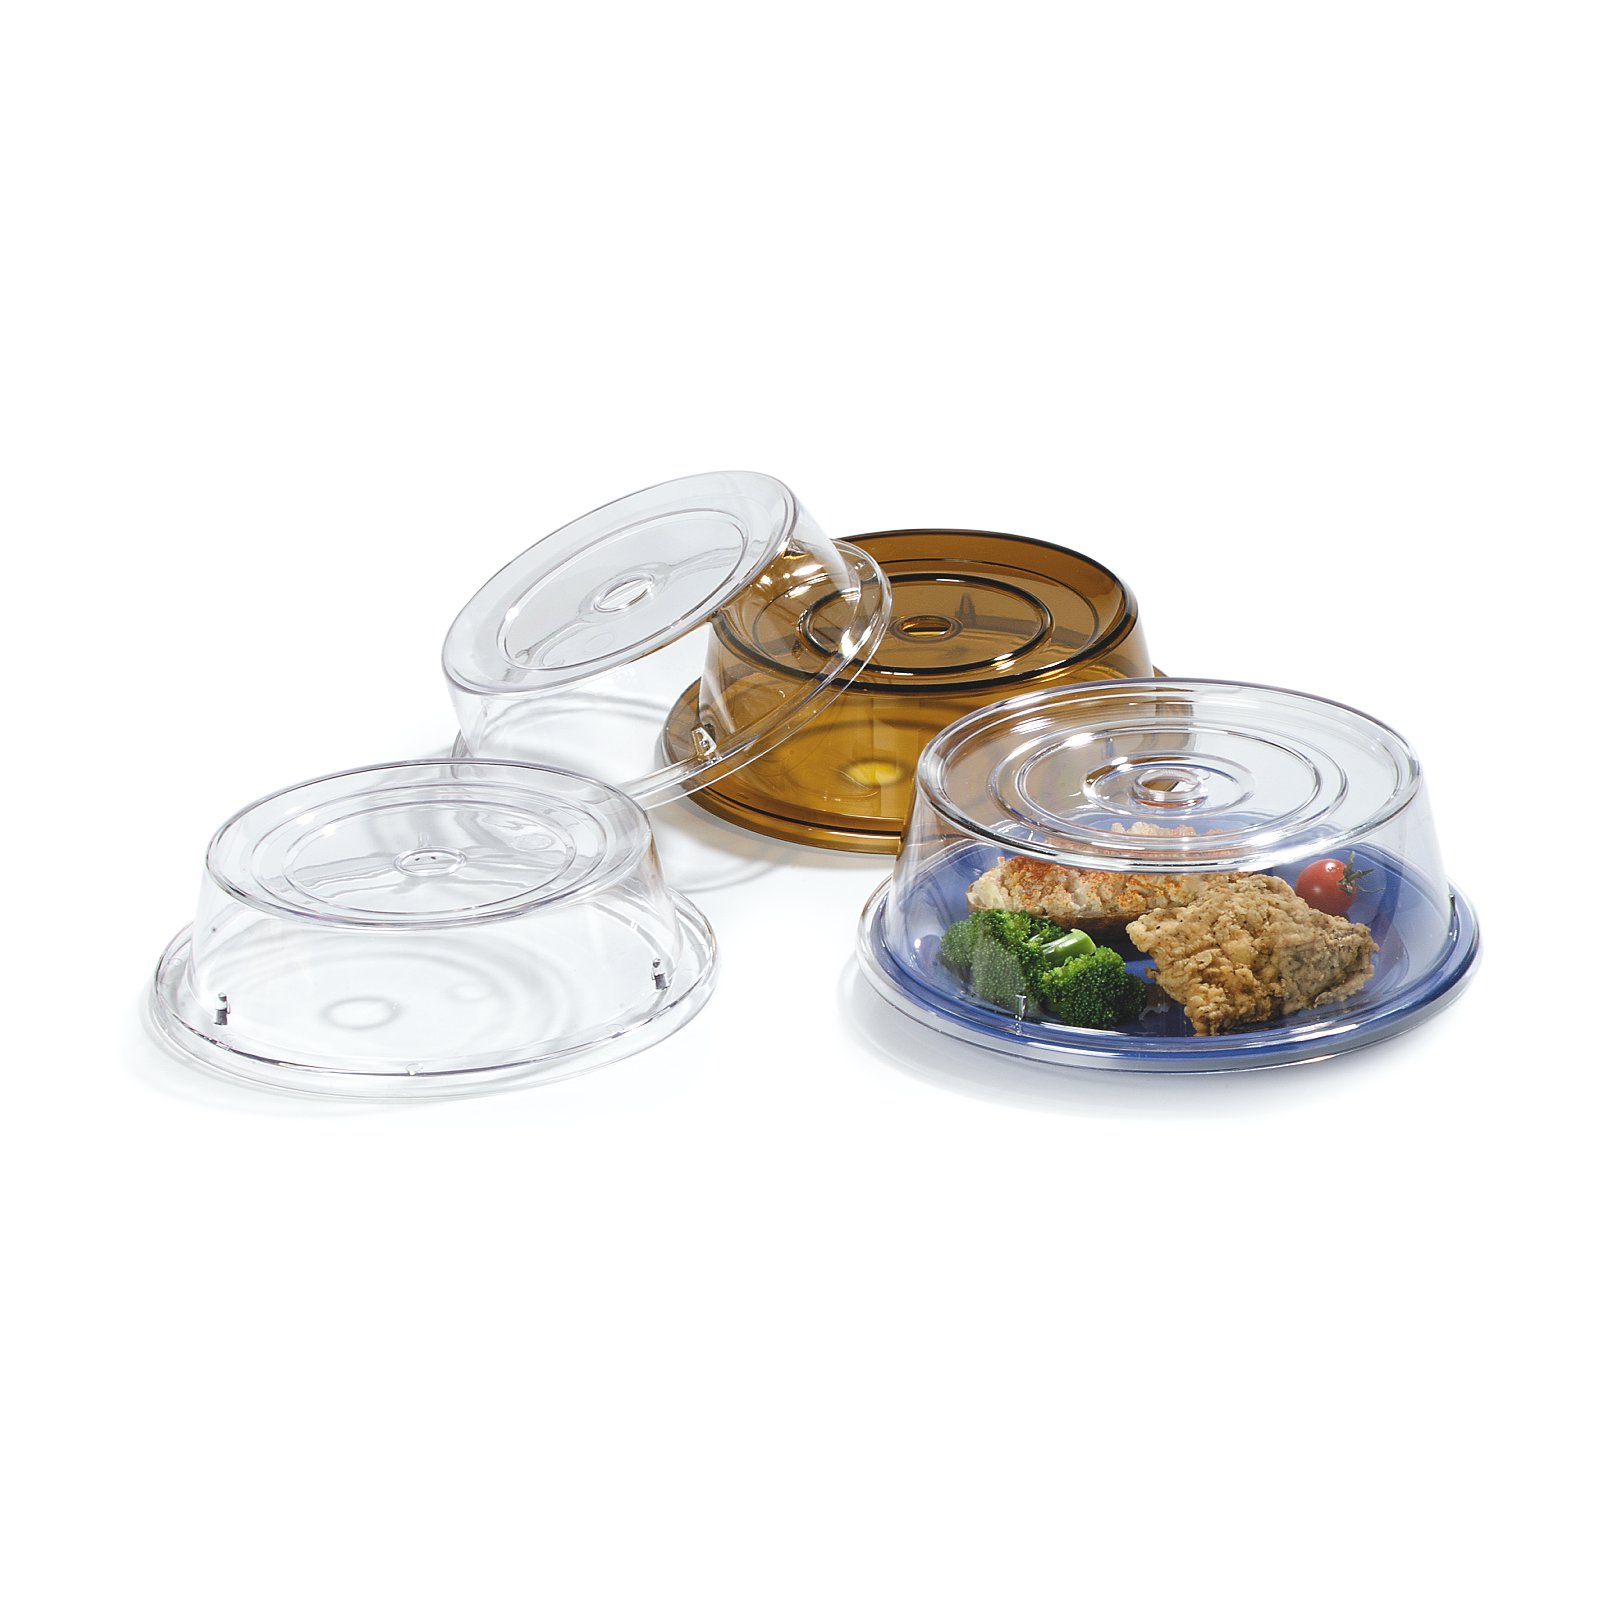 Choice 9 Clear Polycarbonate Plate Cover - 12/Case